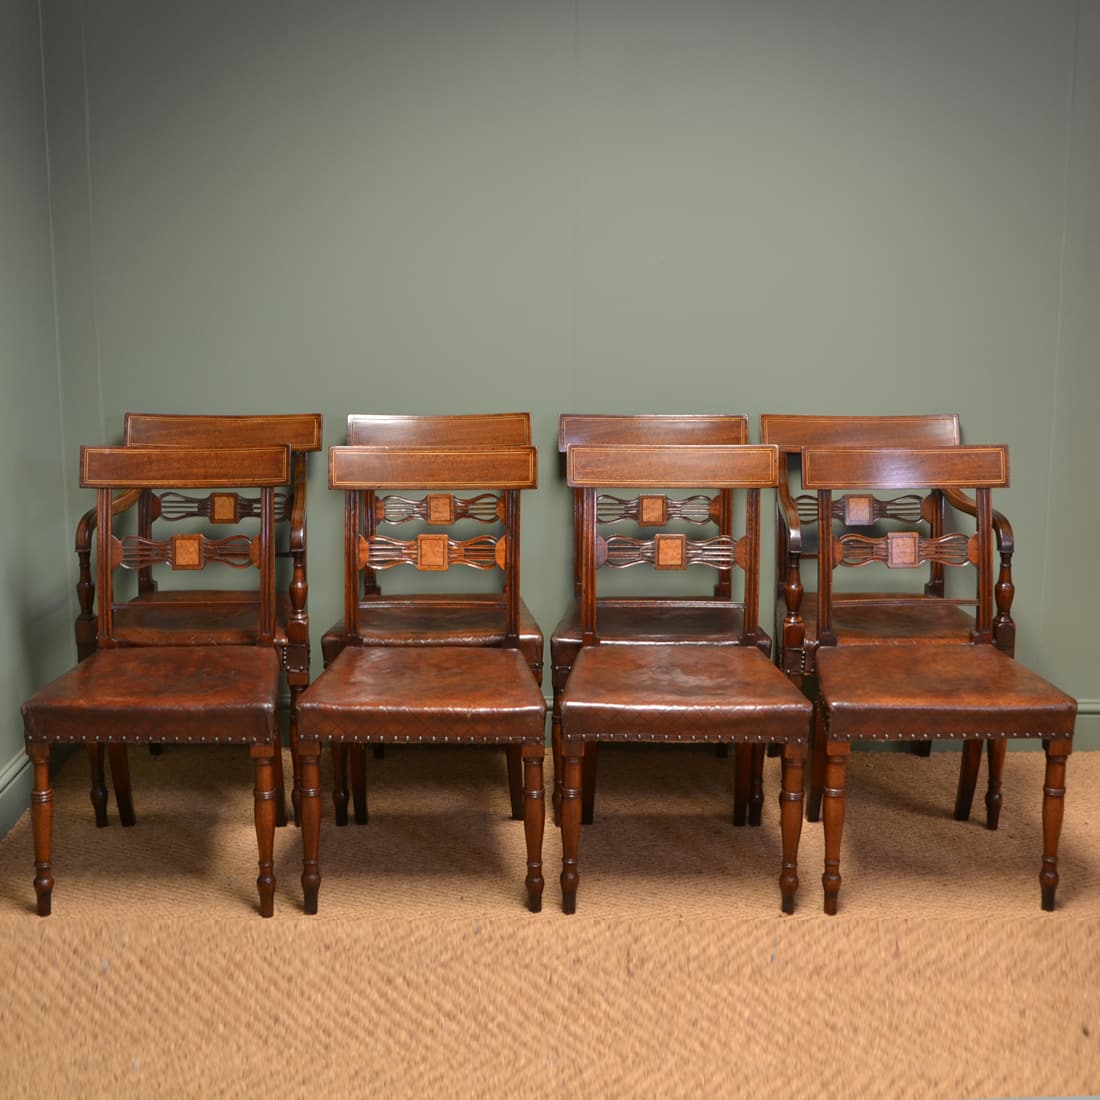 Regency Antique Chairs